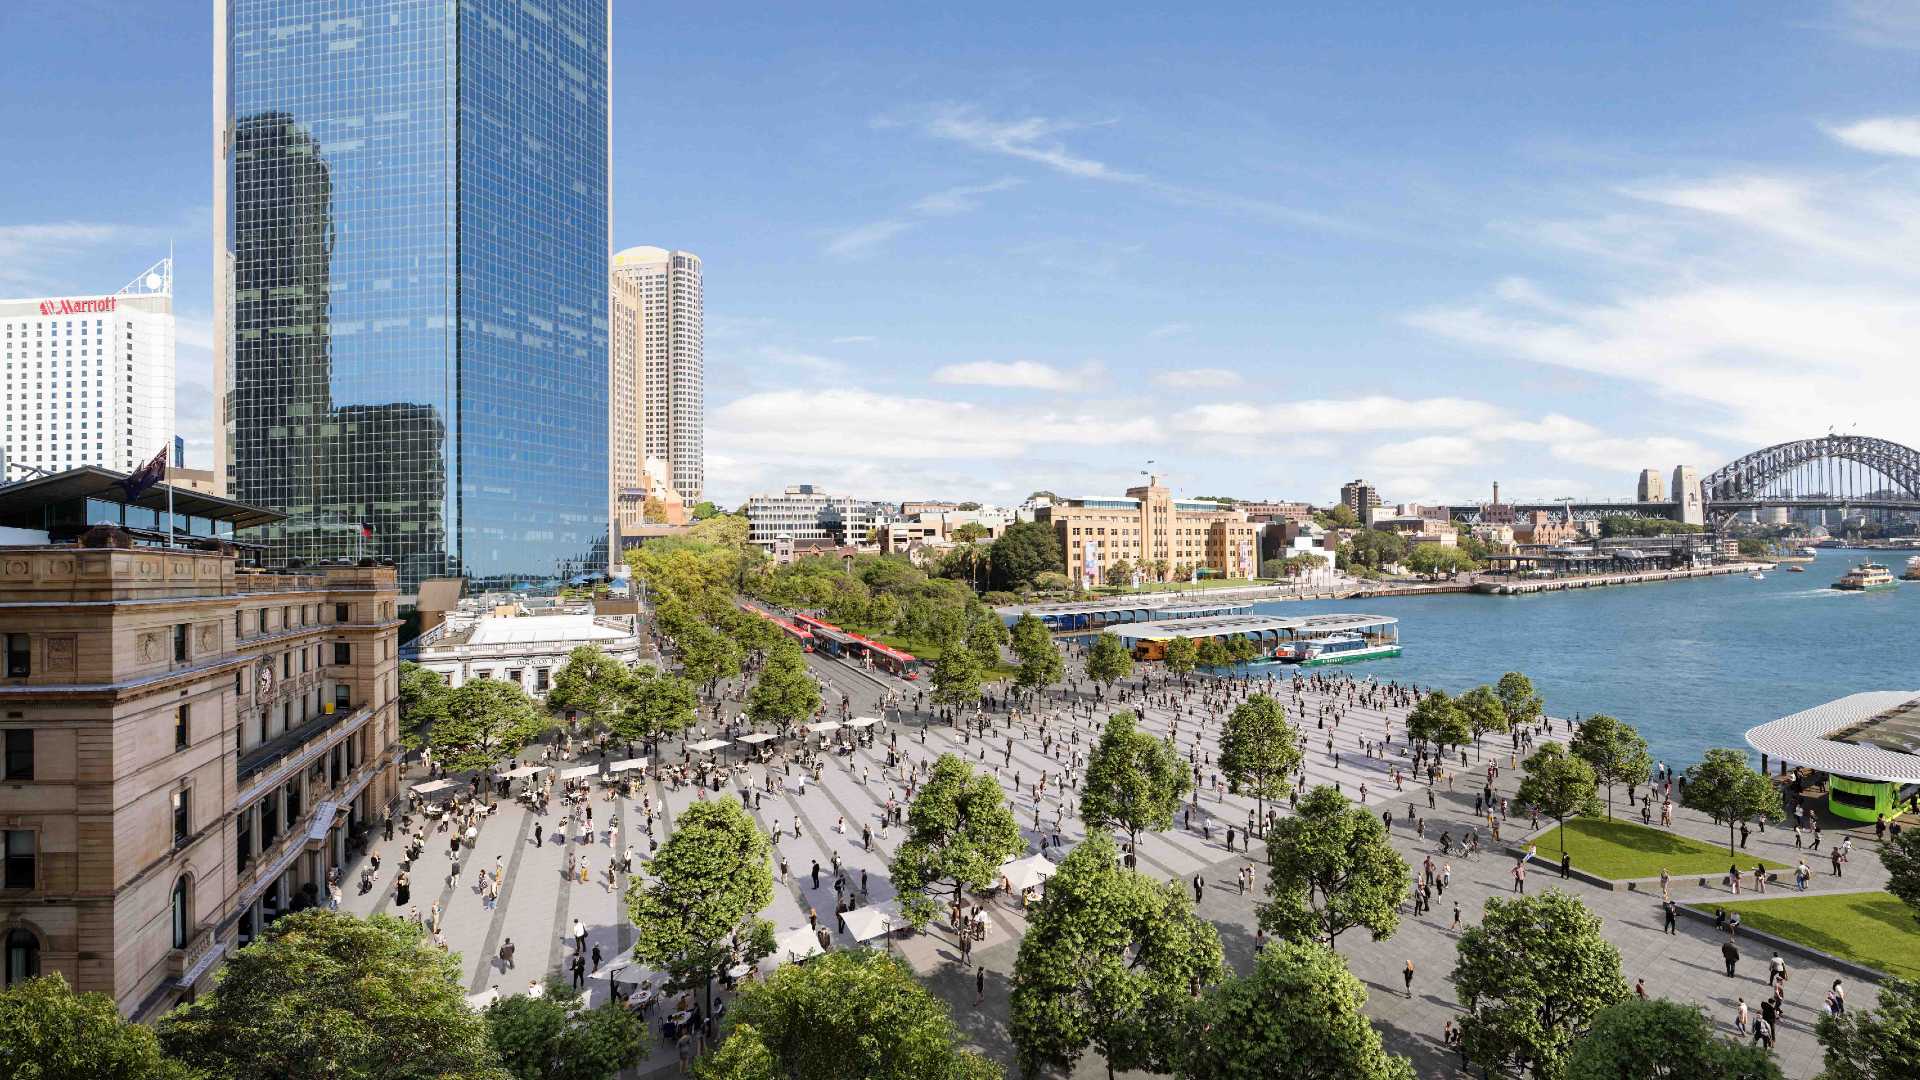 The City of Sydney Has Revealed Plans for Three New Public Squares